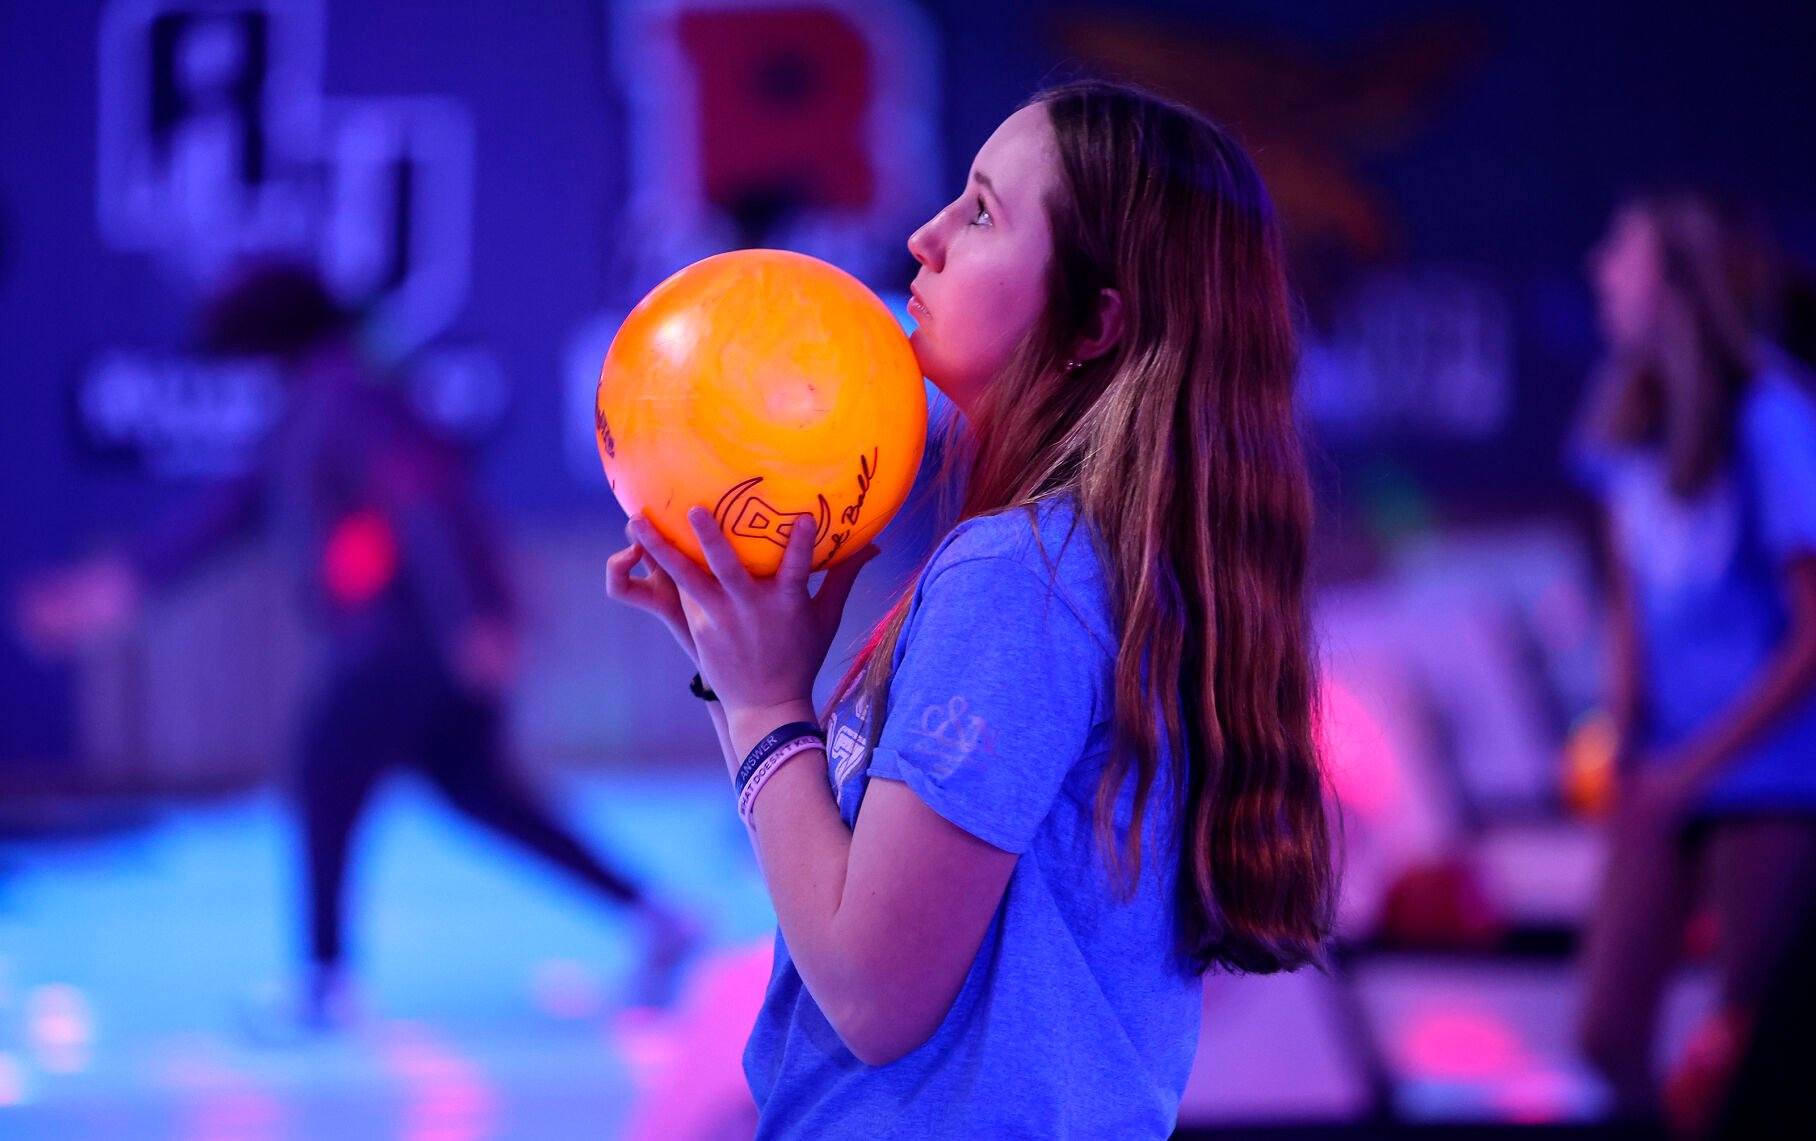 Galena Middle School student Leah Heller looks up at her score before throwing the ball at Pioneer Lanes.    PHOTO CREDIT: Dave Kettering
Telegraph Herald